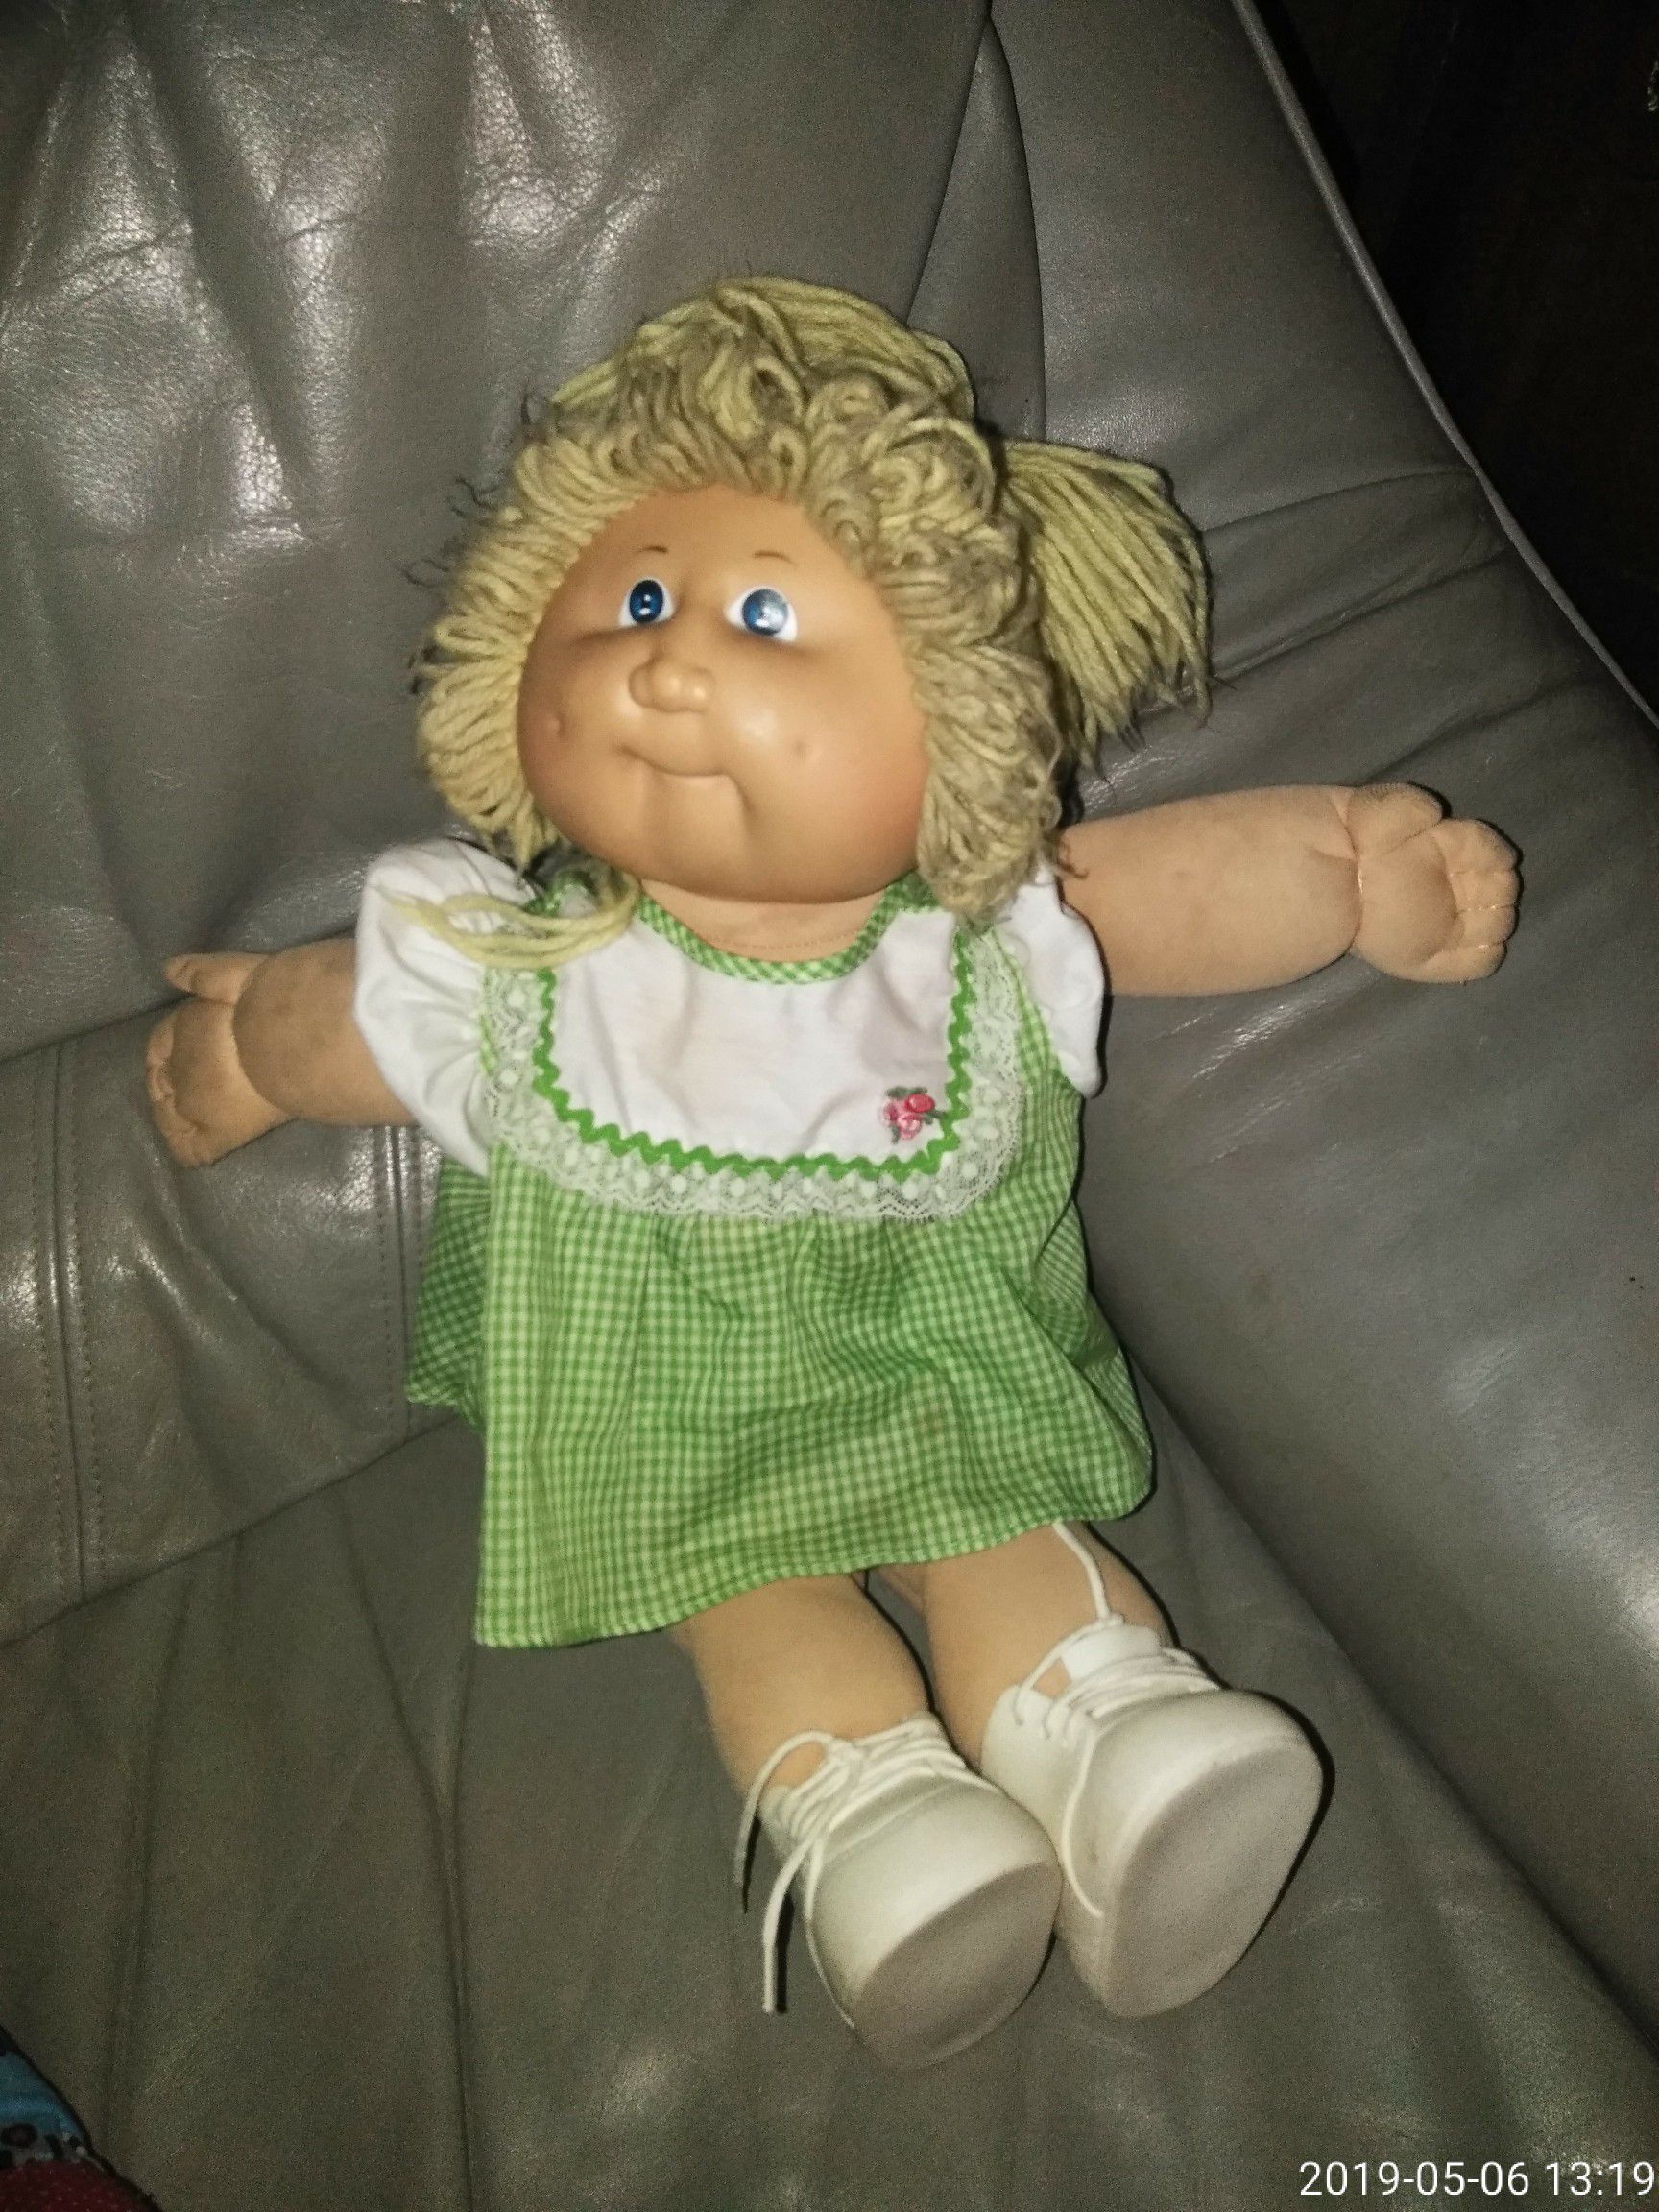 Original 1980s cabbage patch doll